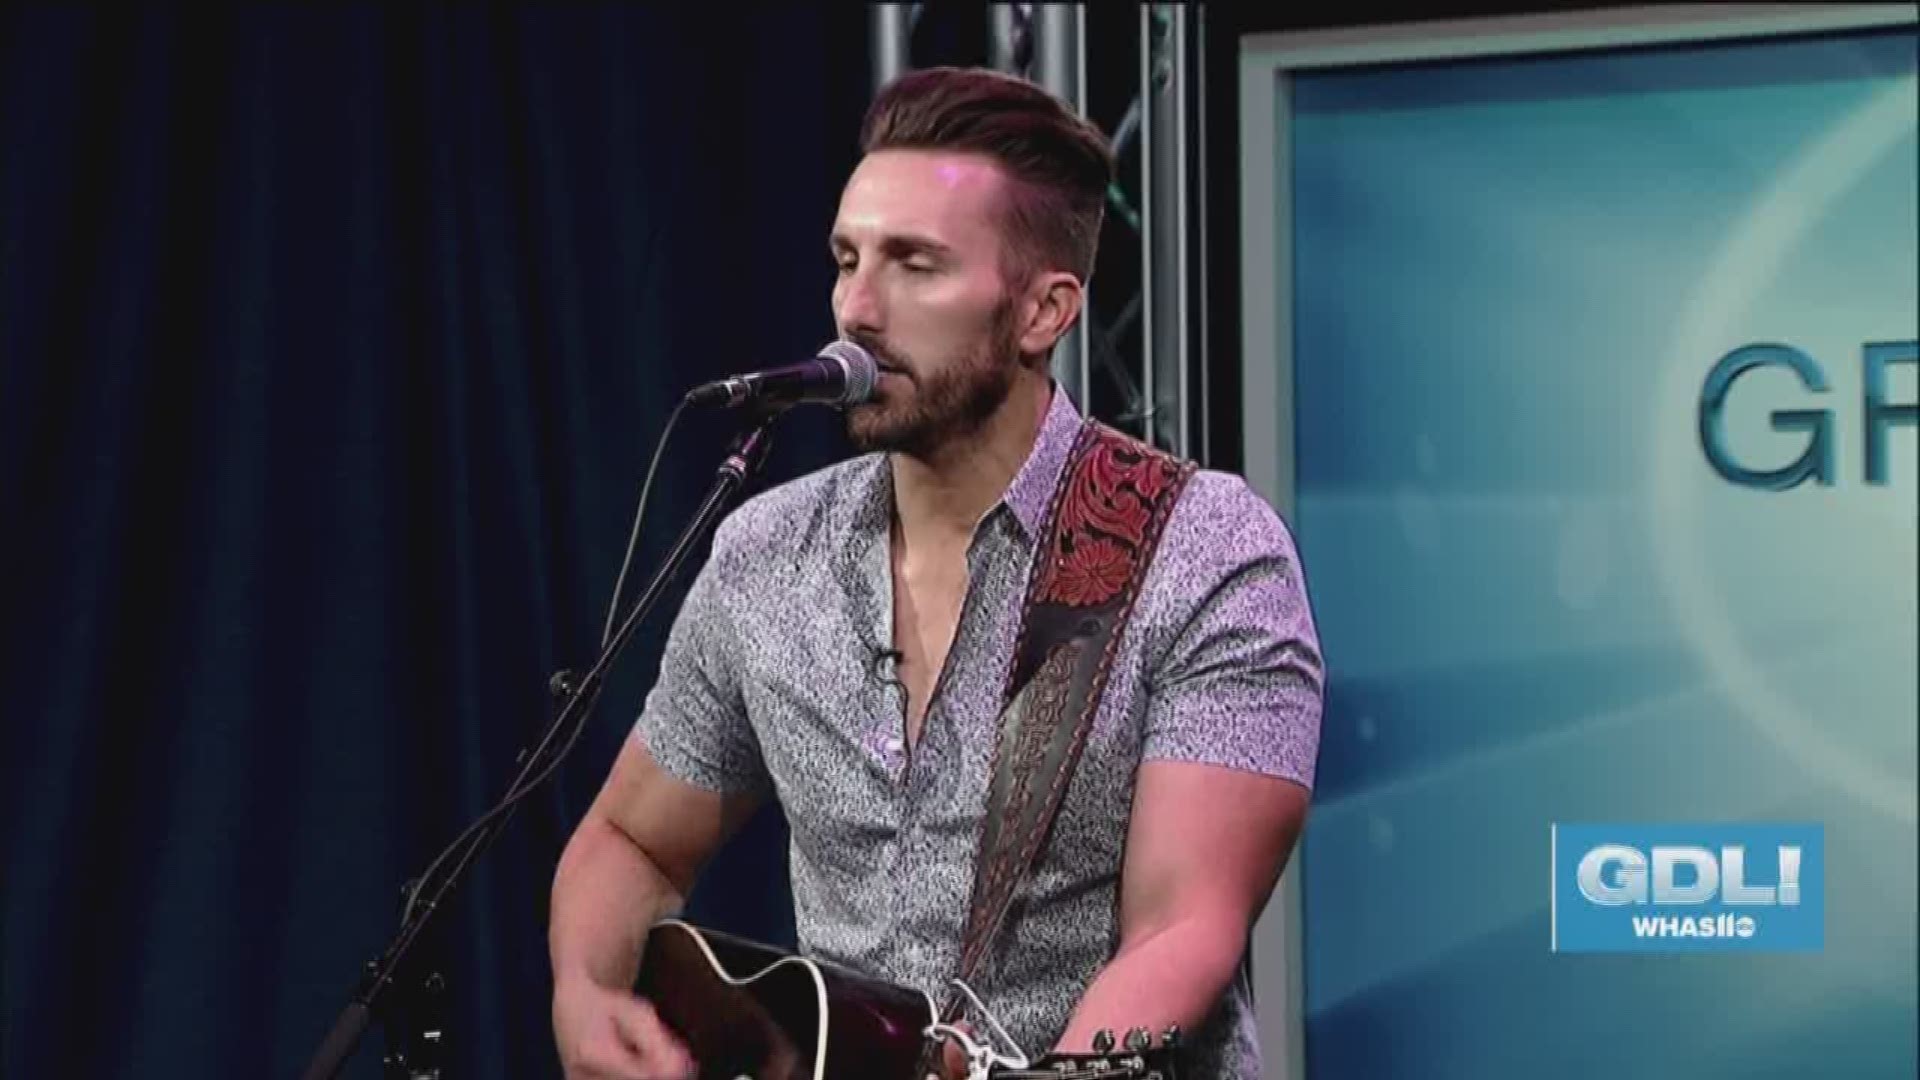 JD Shelburne stopped by Great Day Live to Perform a couple of his songs.